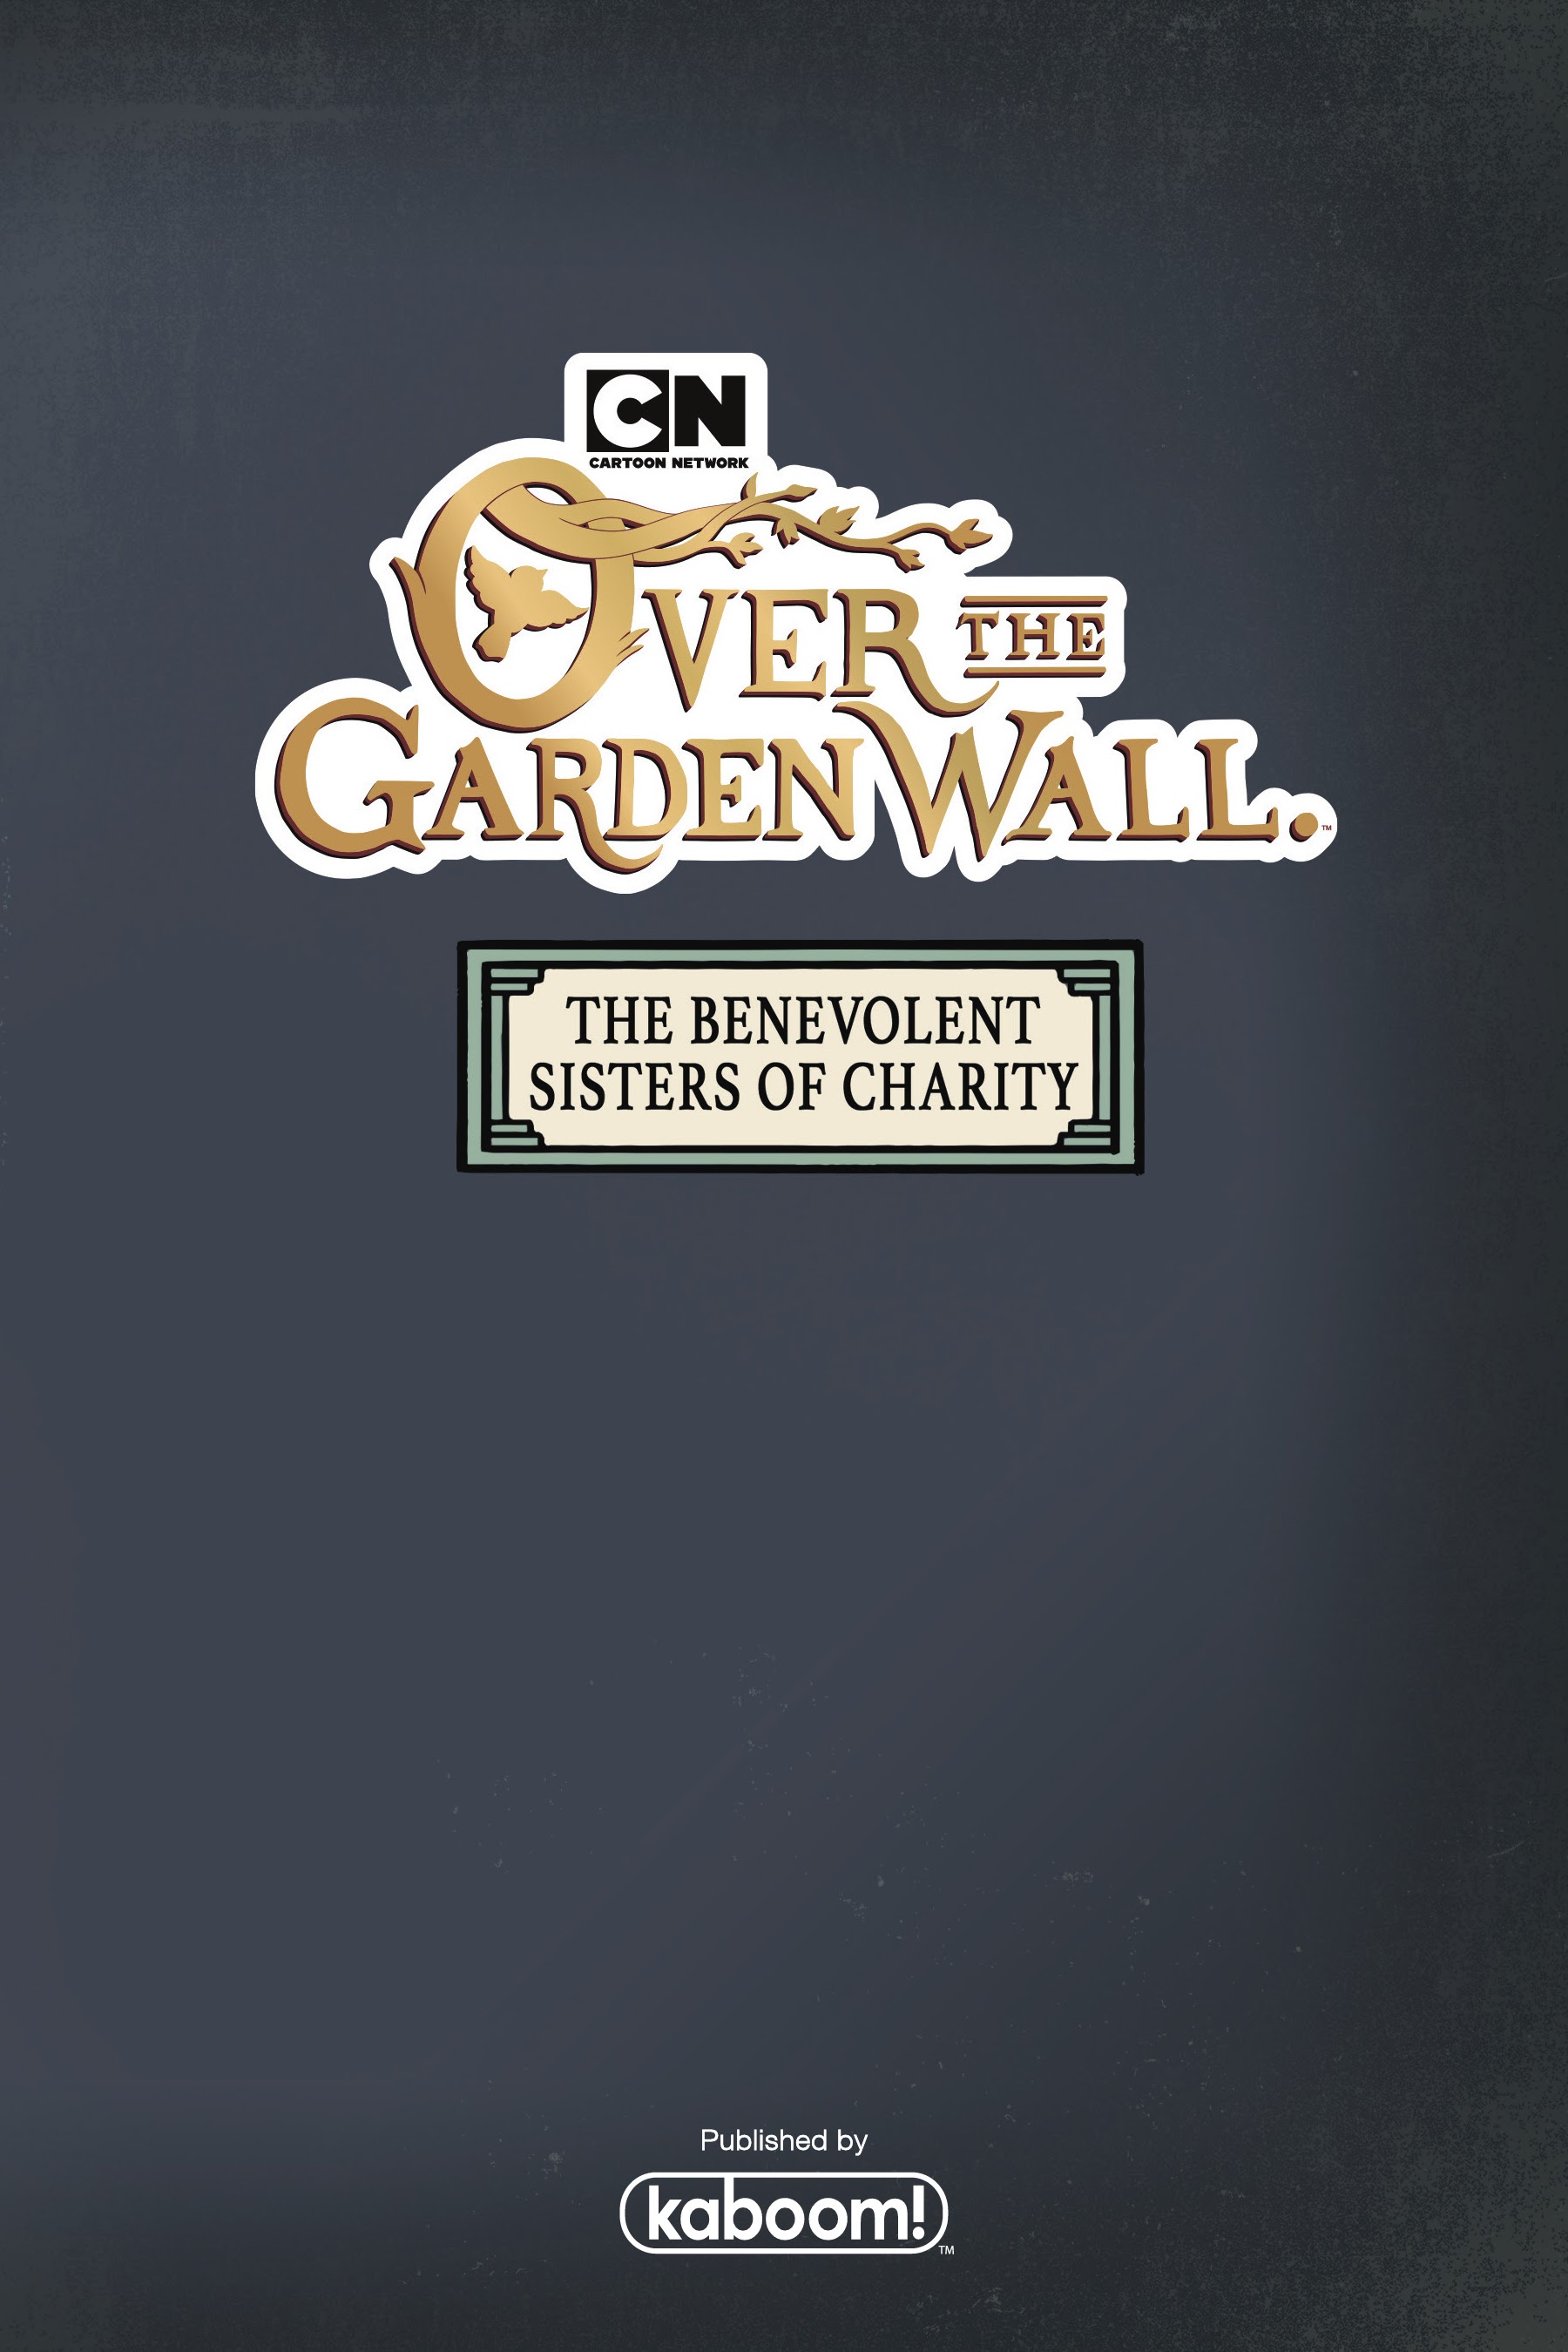 Read online Over the Garden Wall: Benevolent Sisters of Charity comic -  Issue # TPB - 3